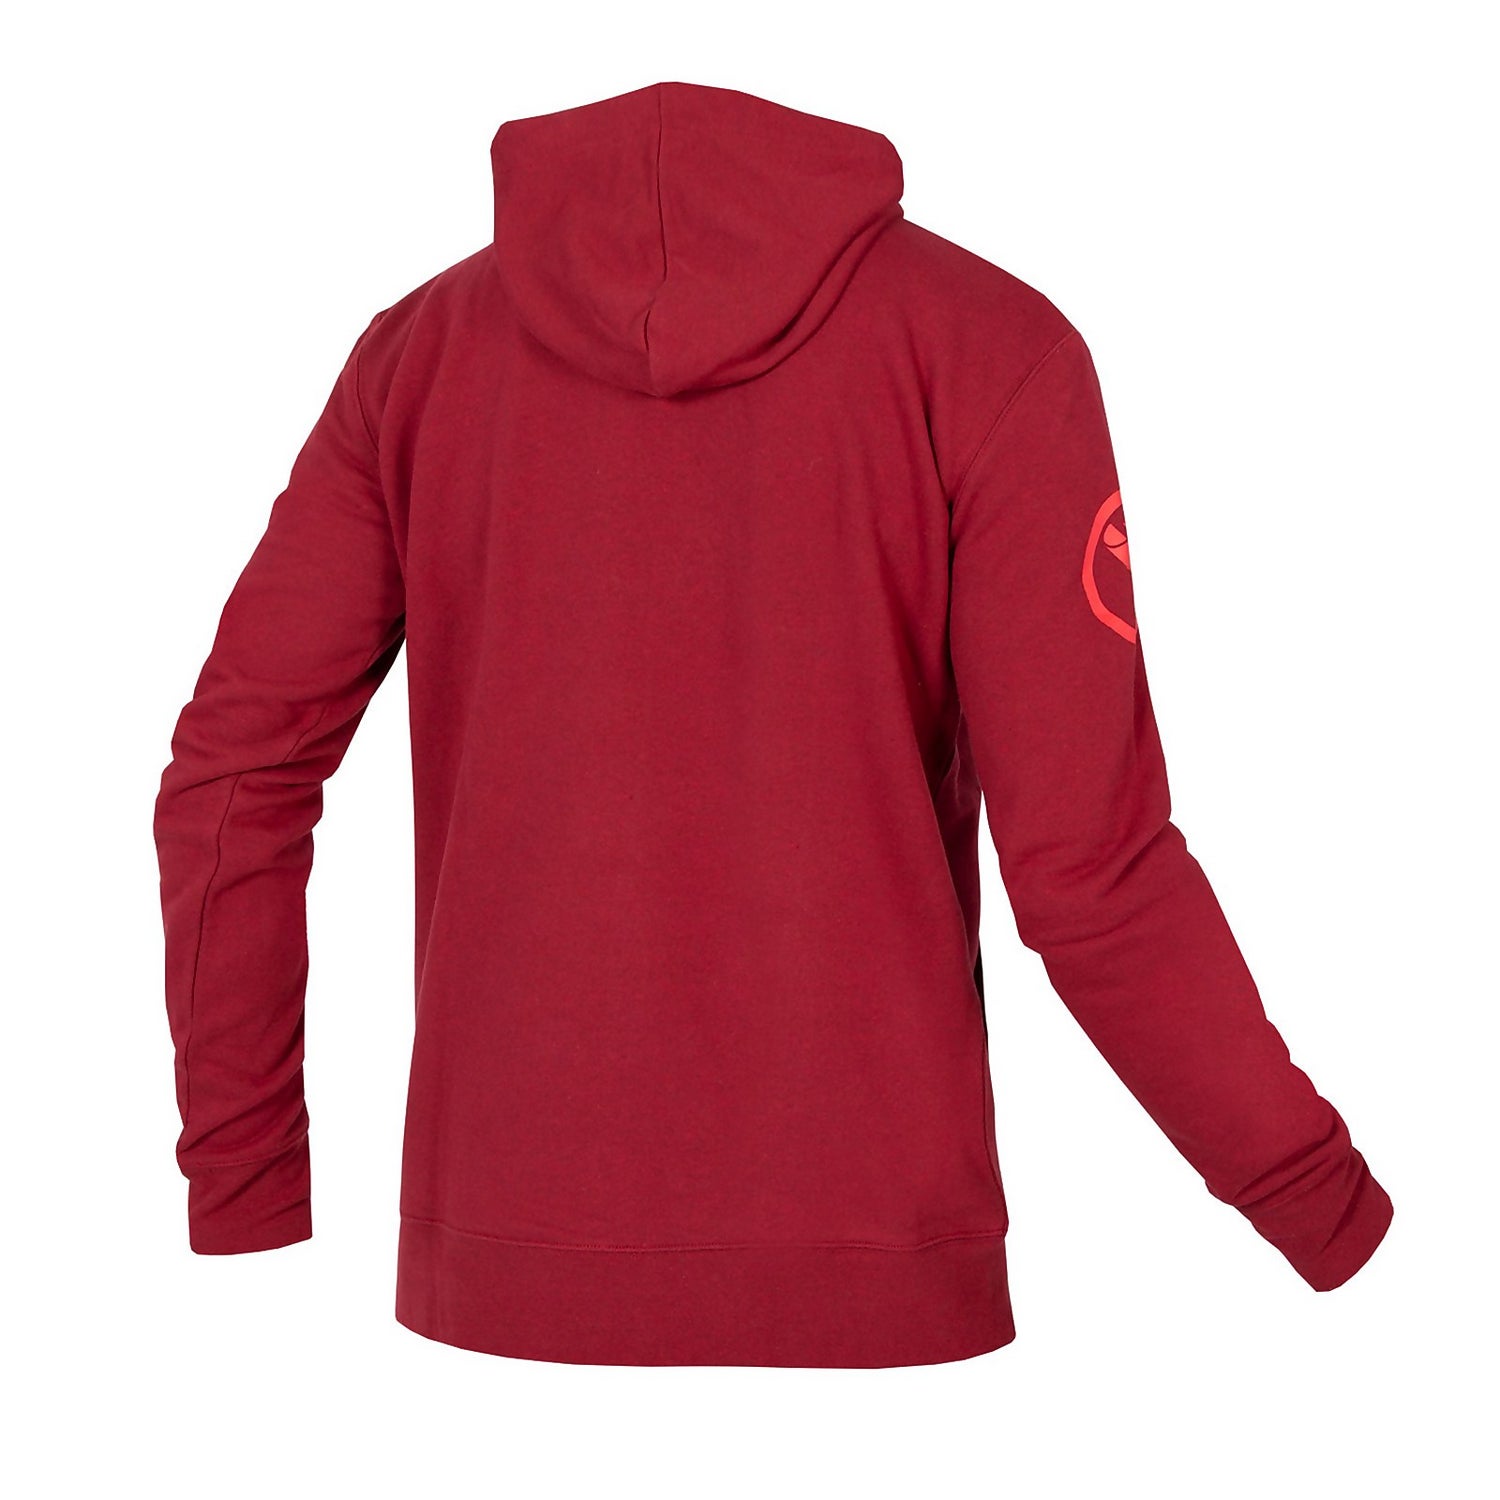 One Clan Hoodie - Rust Red - XXL